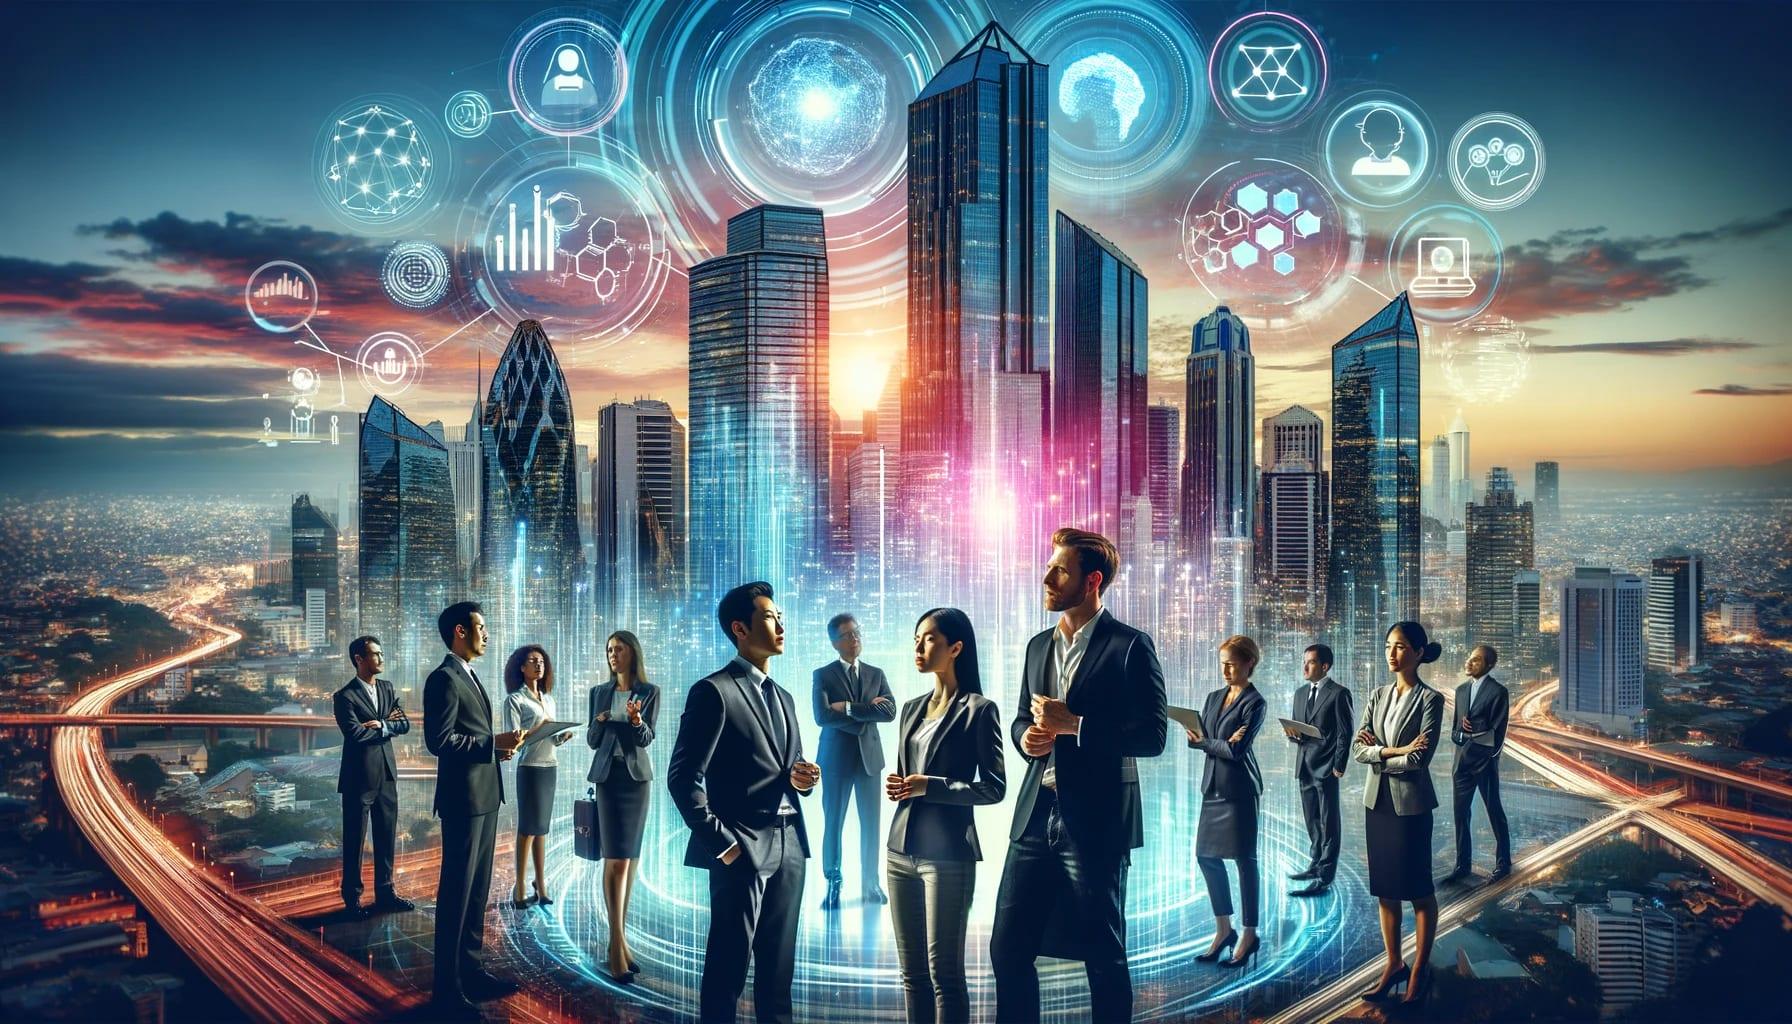 Experience the future of business in this compelling image that merges a bustling cityscape with the digital revolution. Business professionals engage in conversation, underscored by glowing, futuristic icons of analytics, connectivity, and innovation, representing the seamless integration of technology and commerce in the urban environment